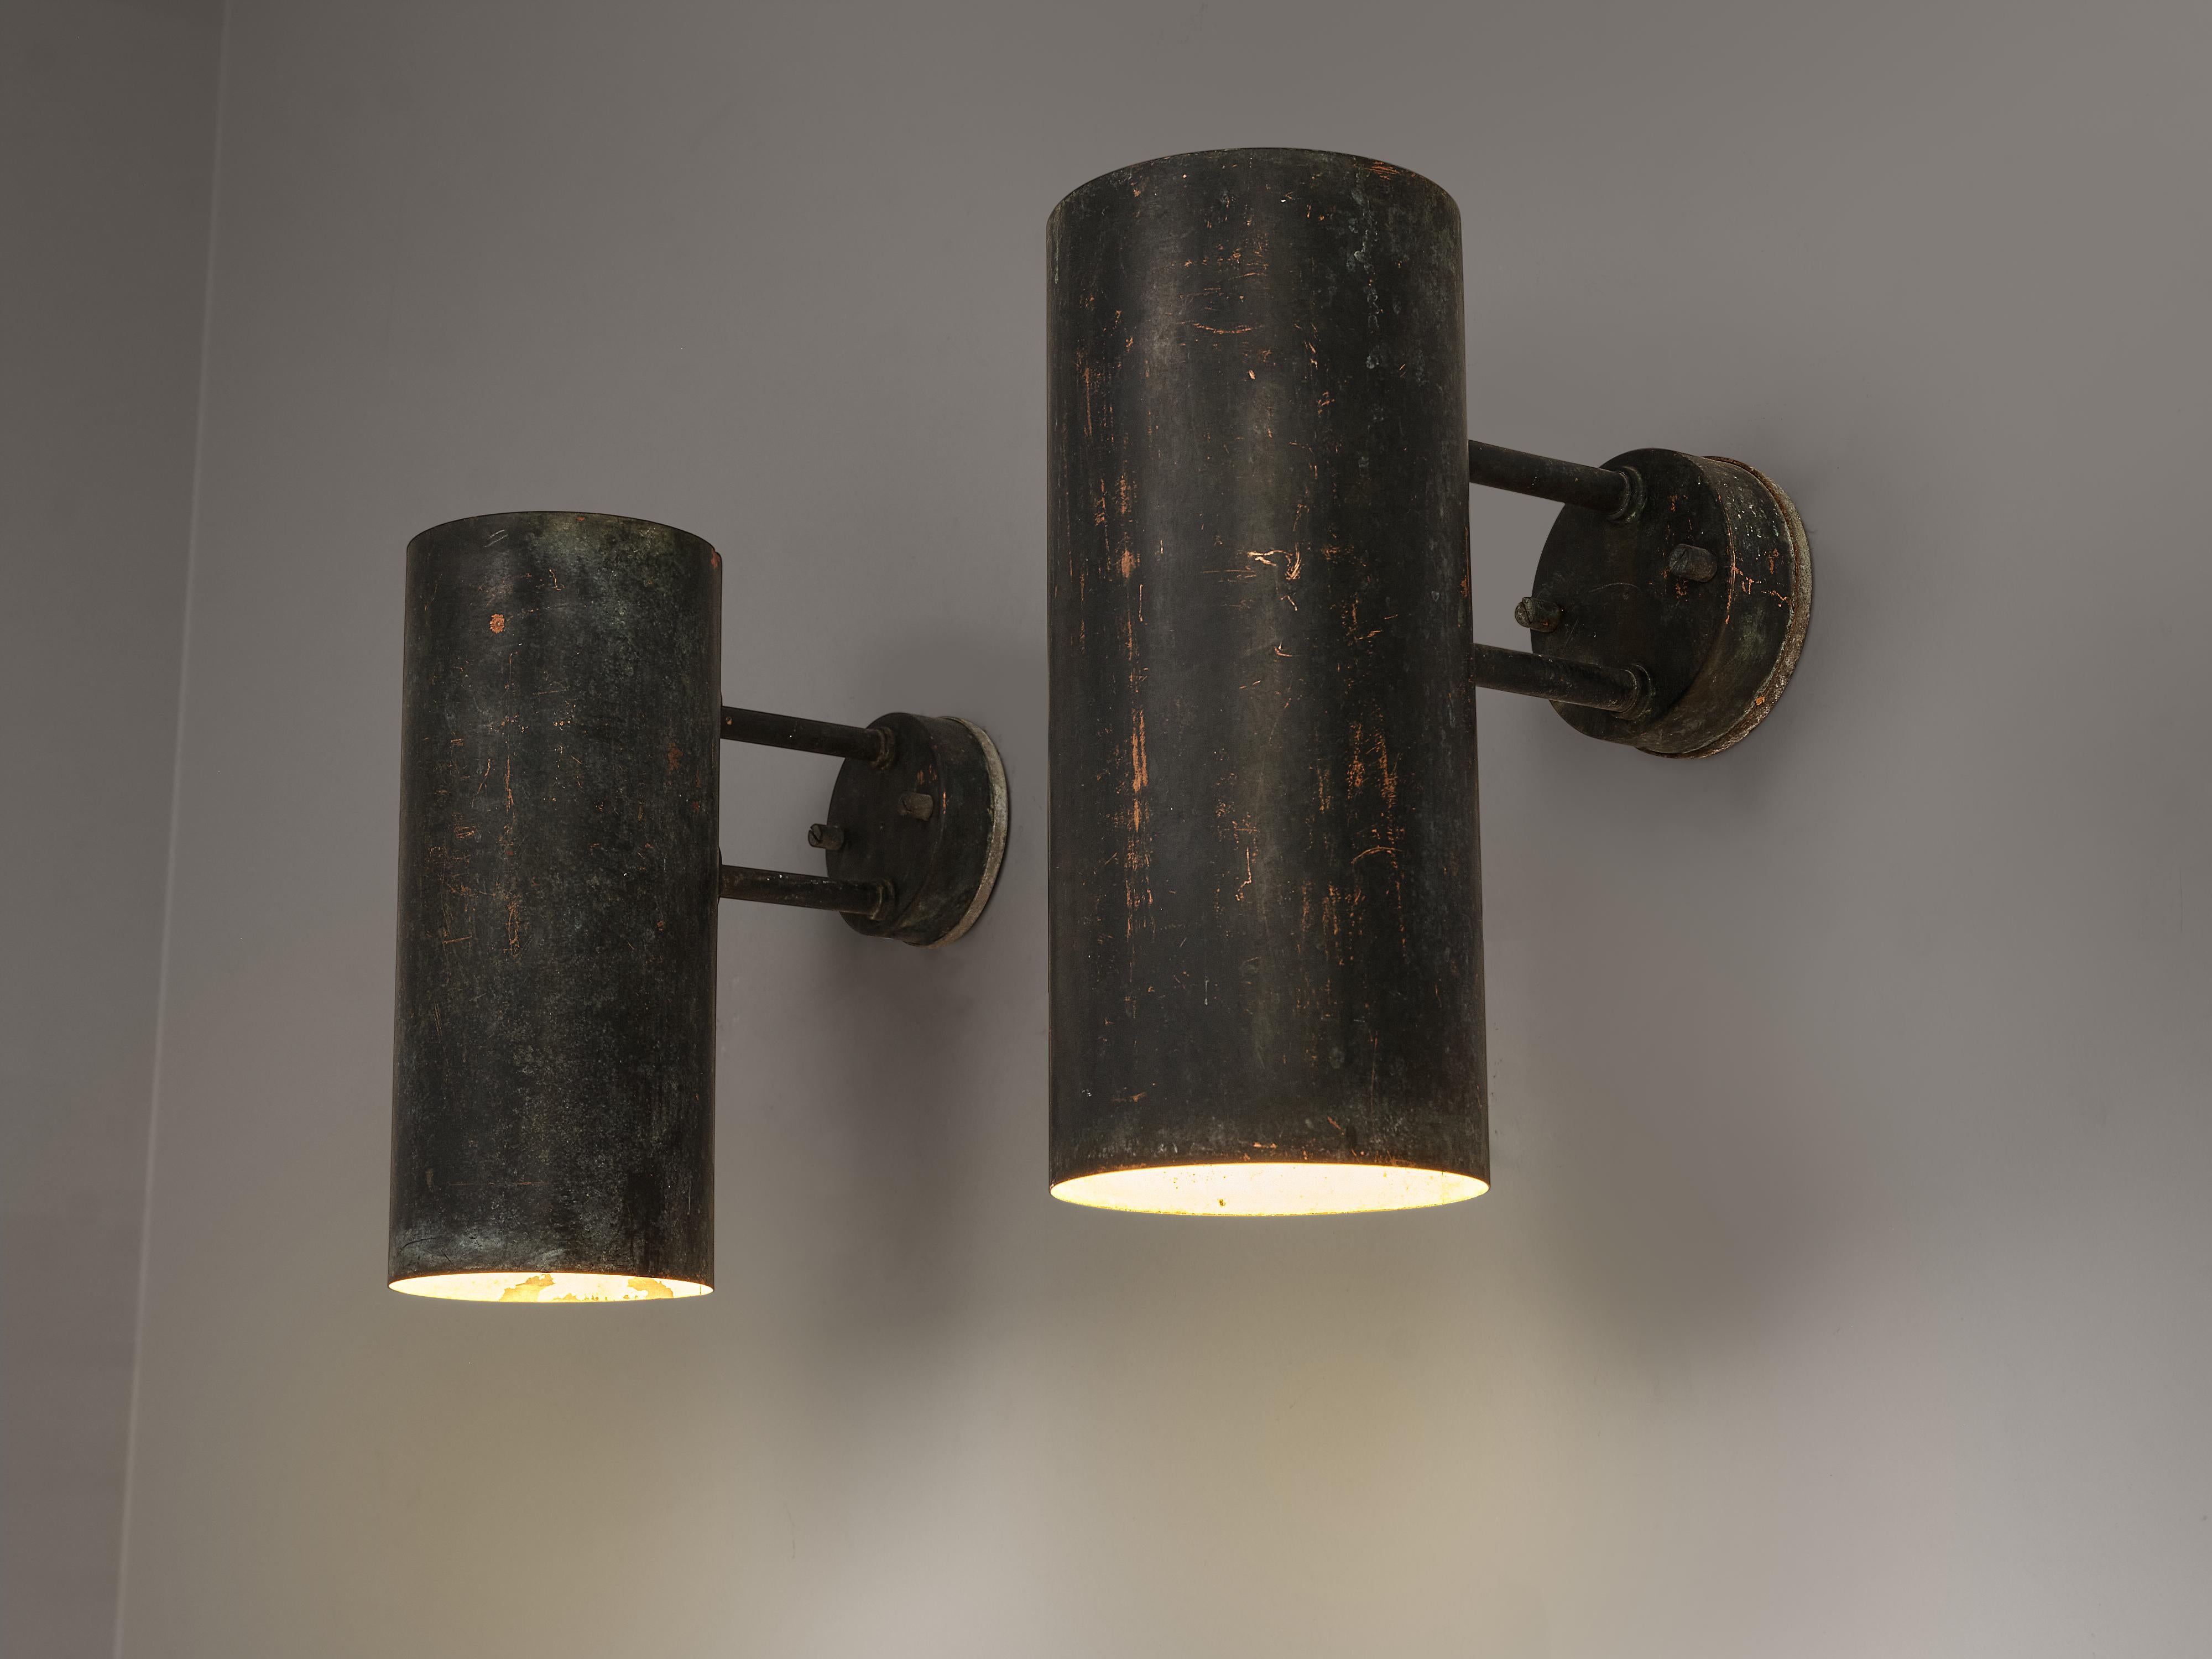 Hans-Agne Jakobsson, ‘Rulle’ wall lights, copper, Sweden, 1960s

The ‘Rulle’ outdoor lights by Swedish designer Hans-Agne Jakobsson feature a cylindric lampshade that is connected to a circular fixation. The way the rich patina structures the